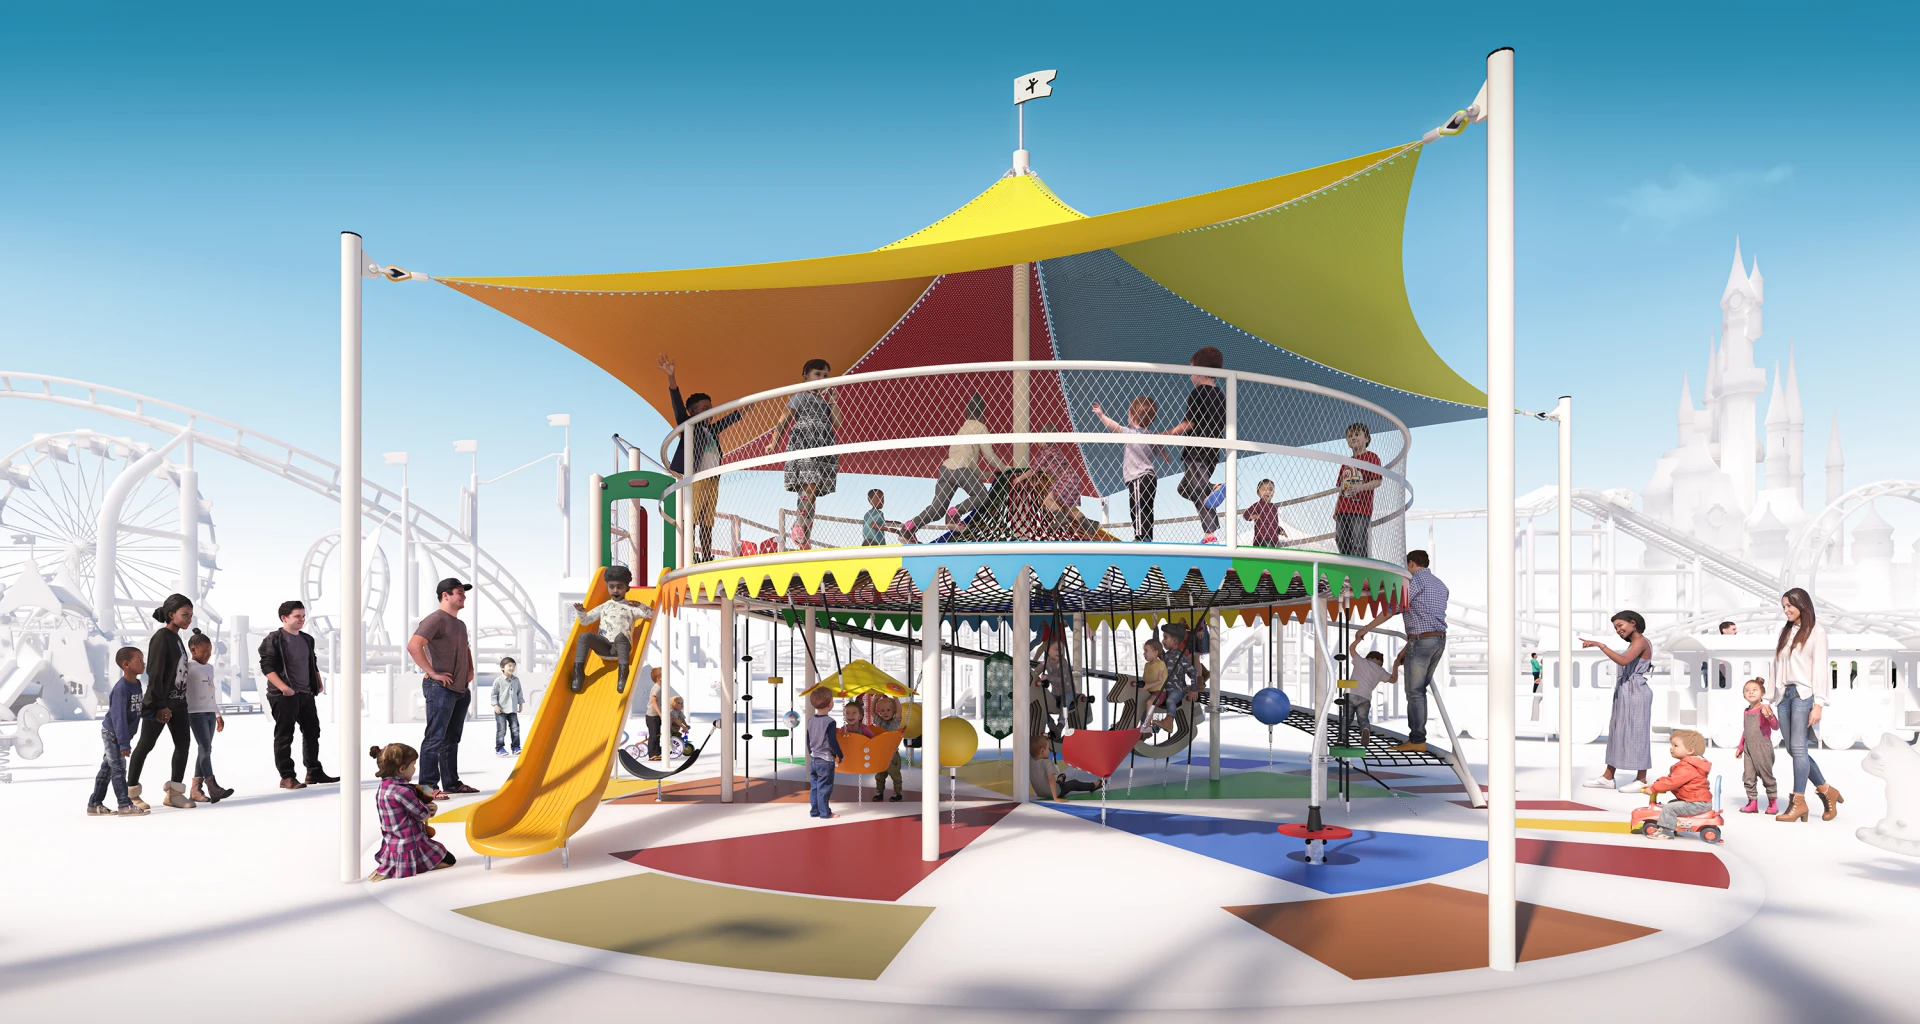 A design concept of a circus themed playground